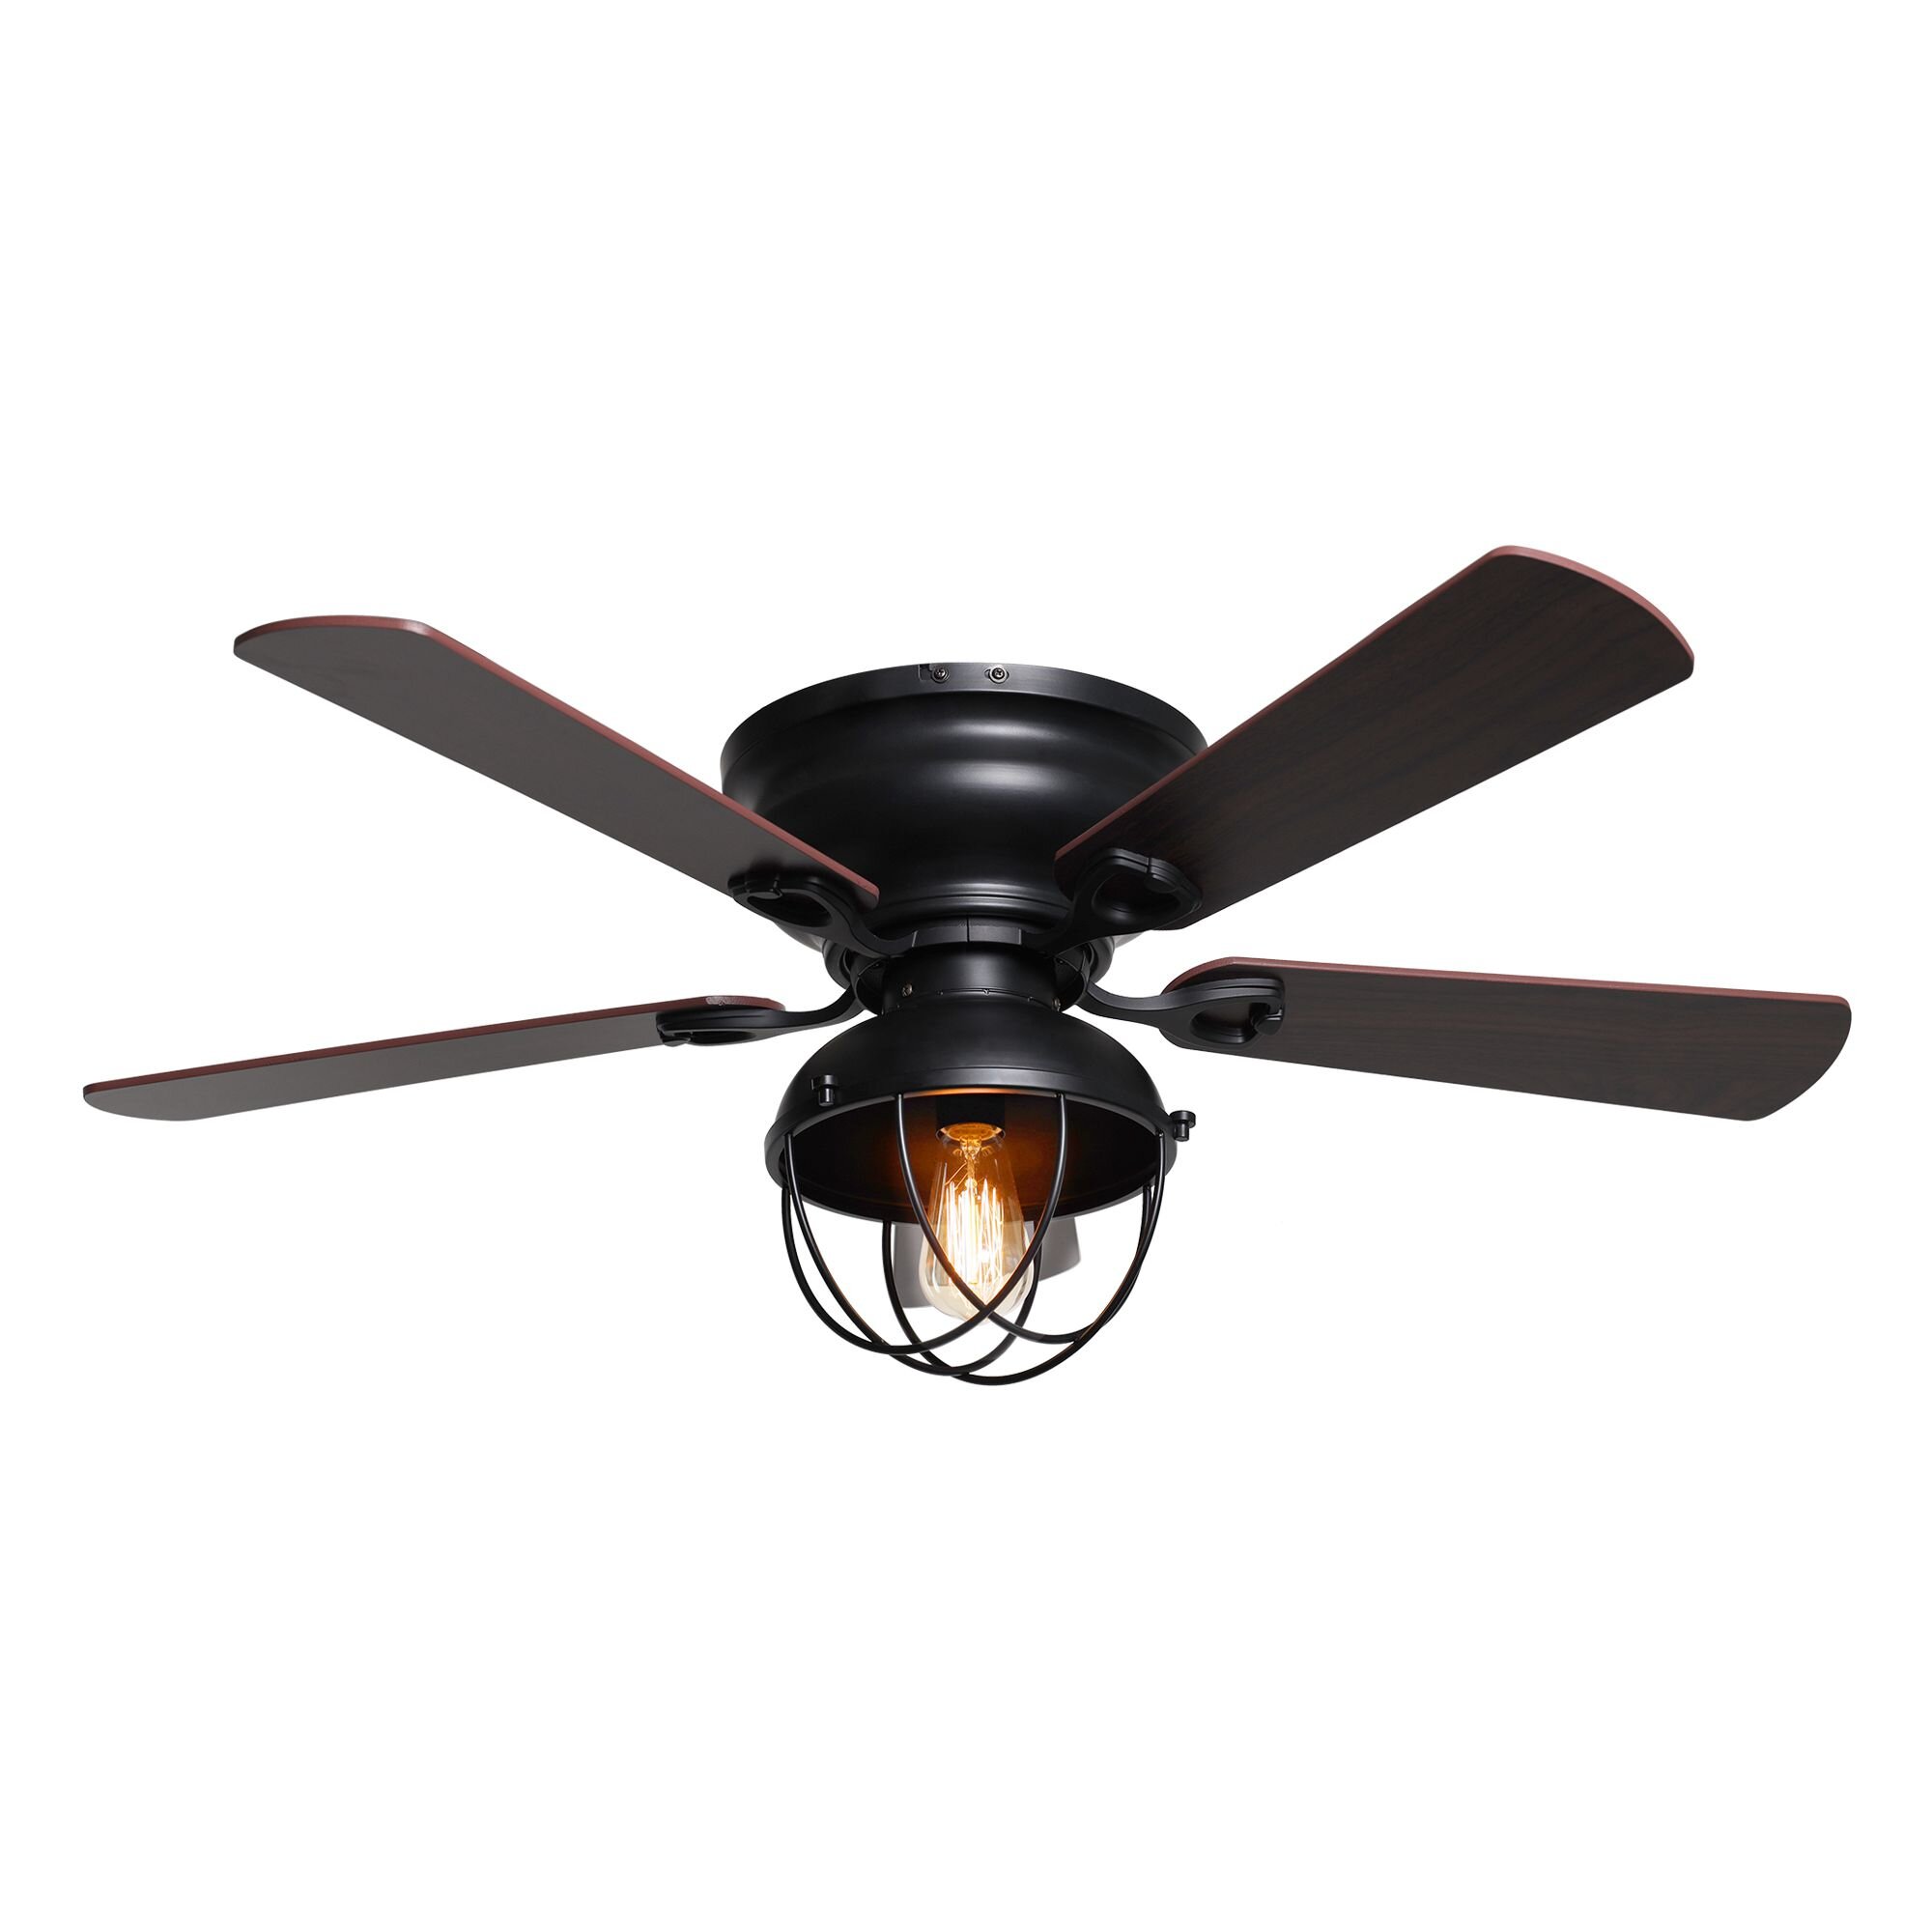 Williston Forge 42 Pickard 5 Blade Flush Mount Ceiling Fan With Remote Control And Light Kit Included Reviews Wayfair